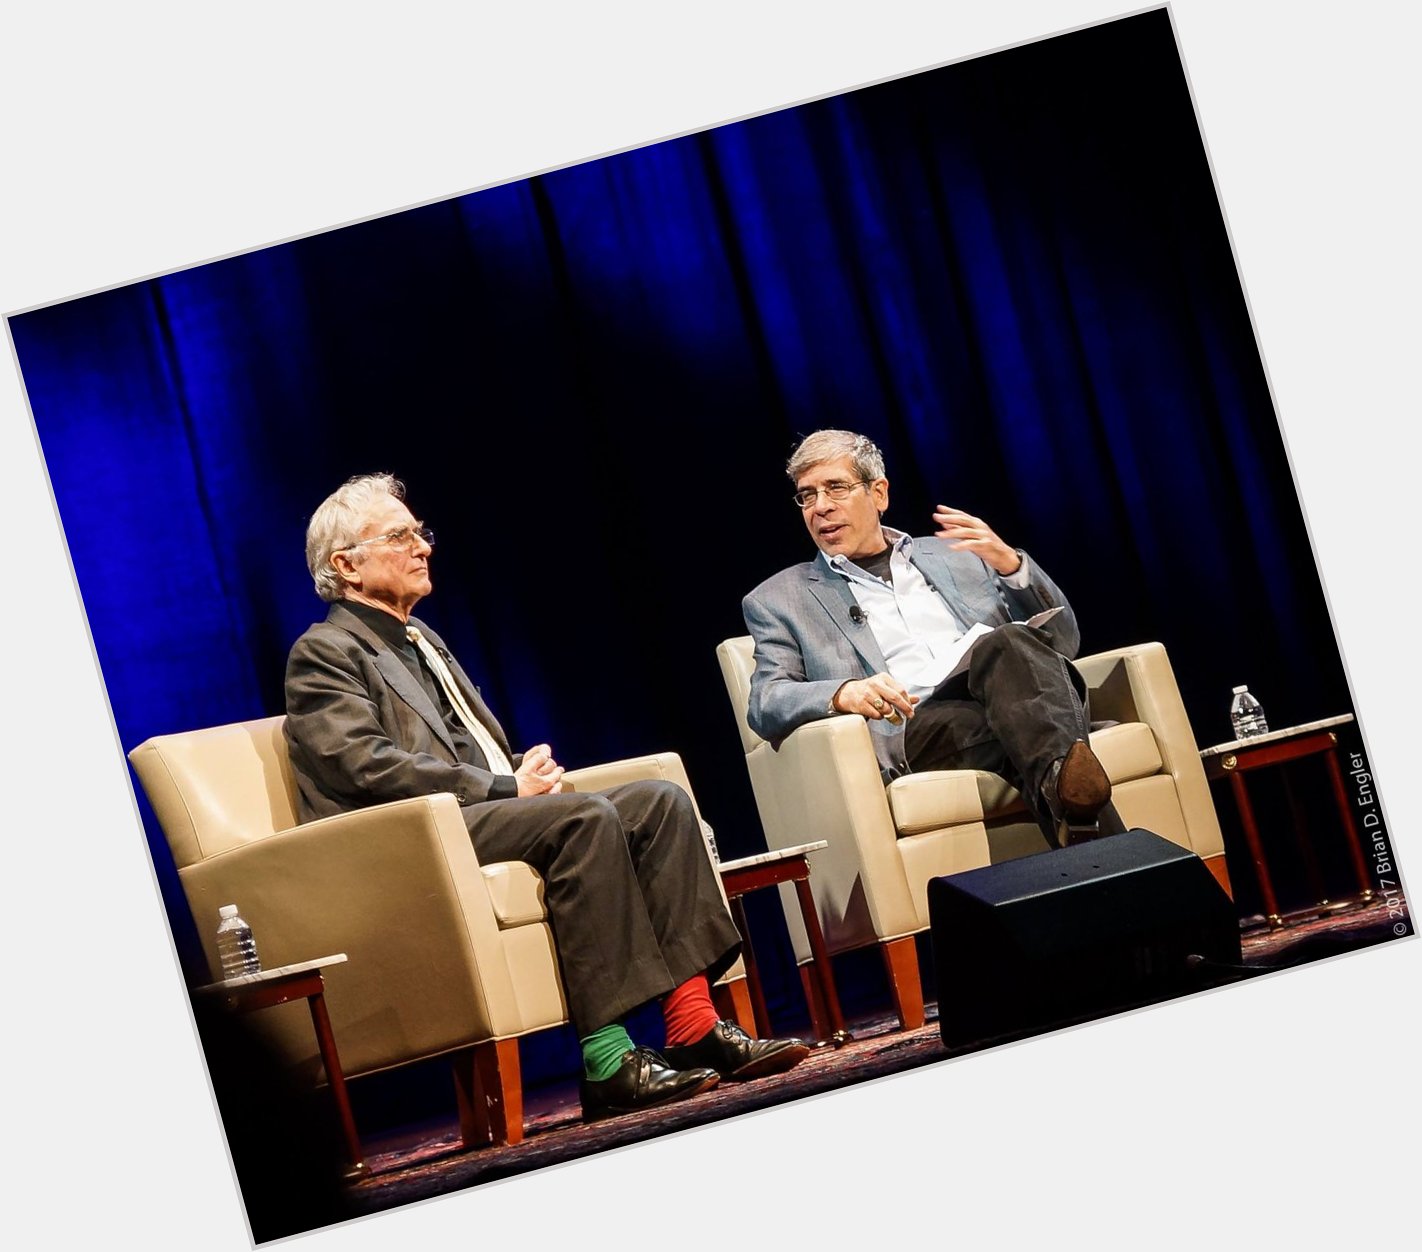 Happy birthday to Richard Dawkins, who turns 80 today. 

The obligatory vanity photo; note his unmatched socks. 